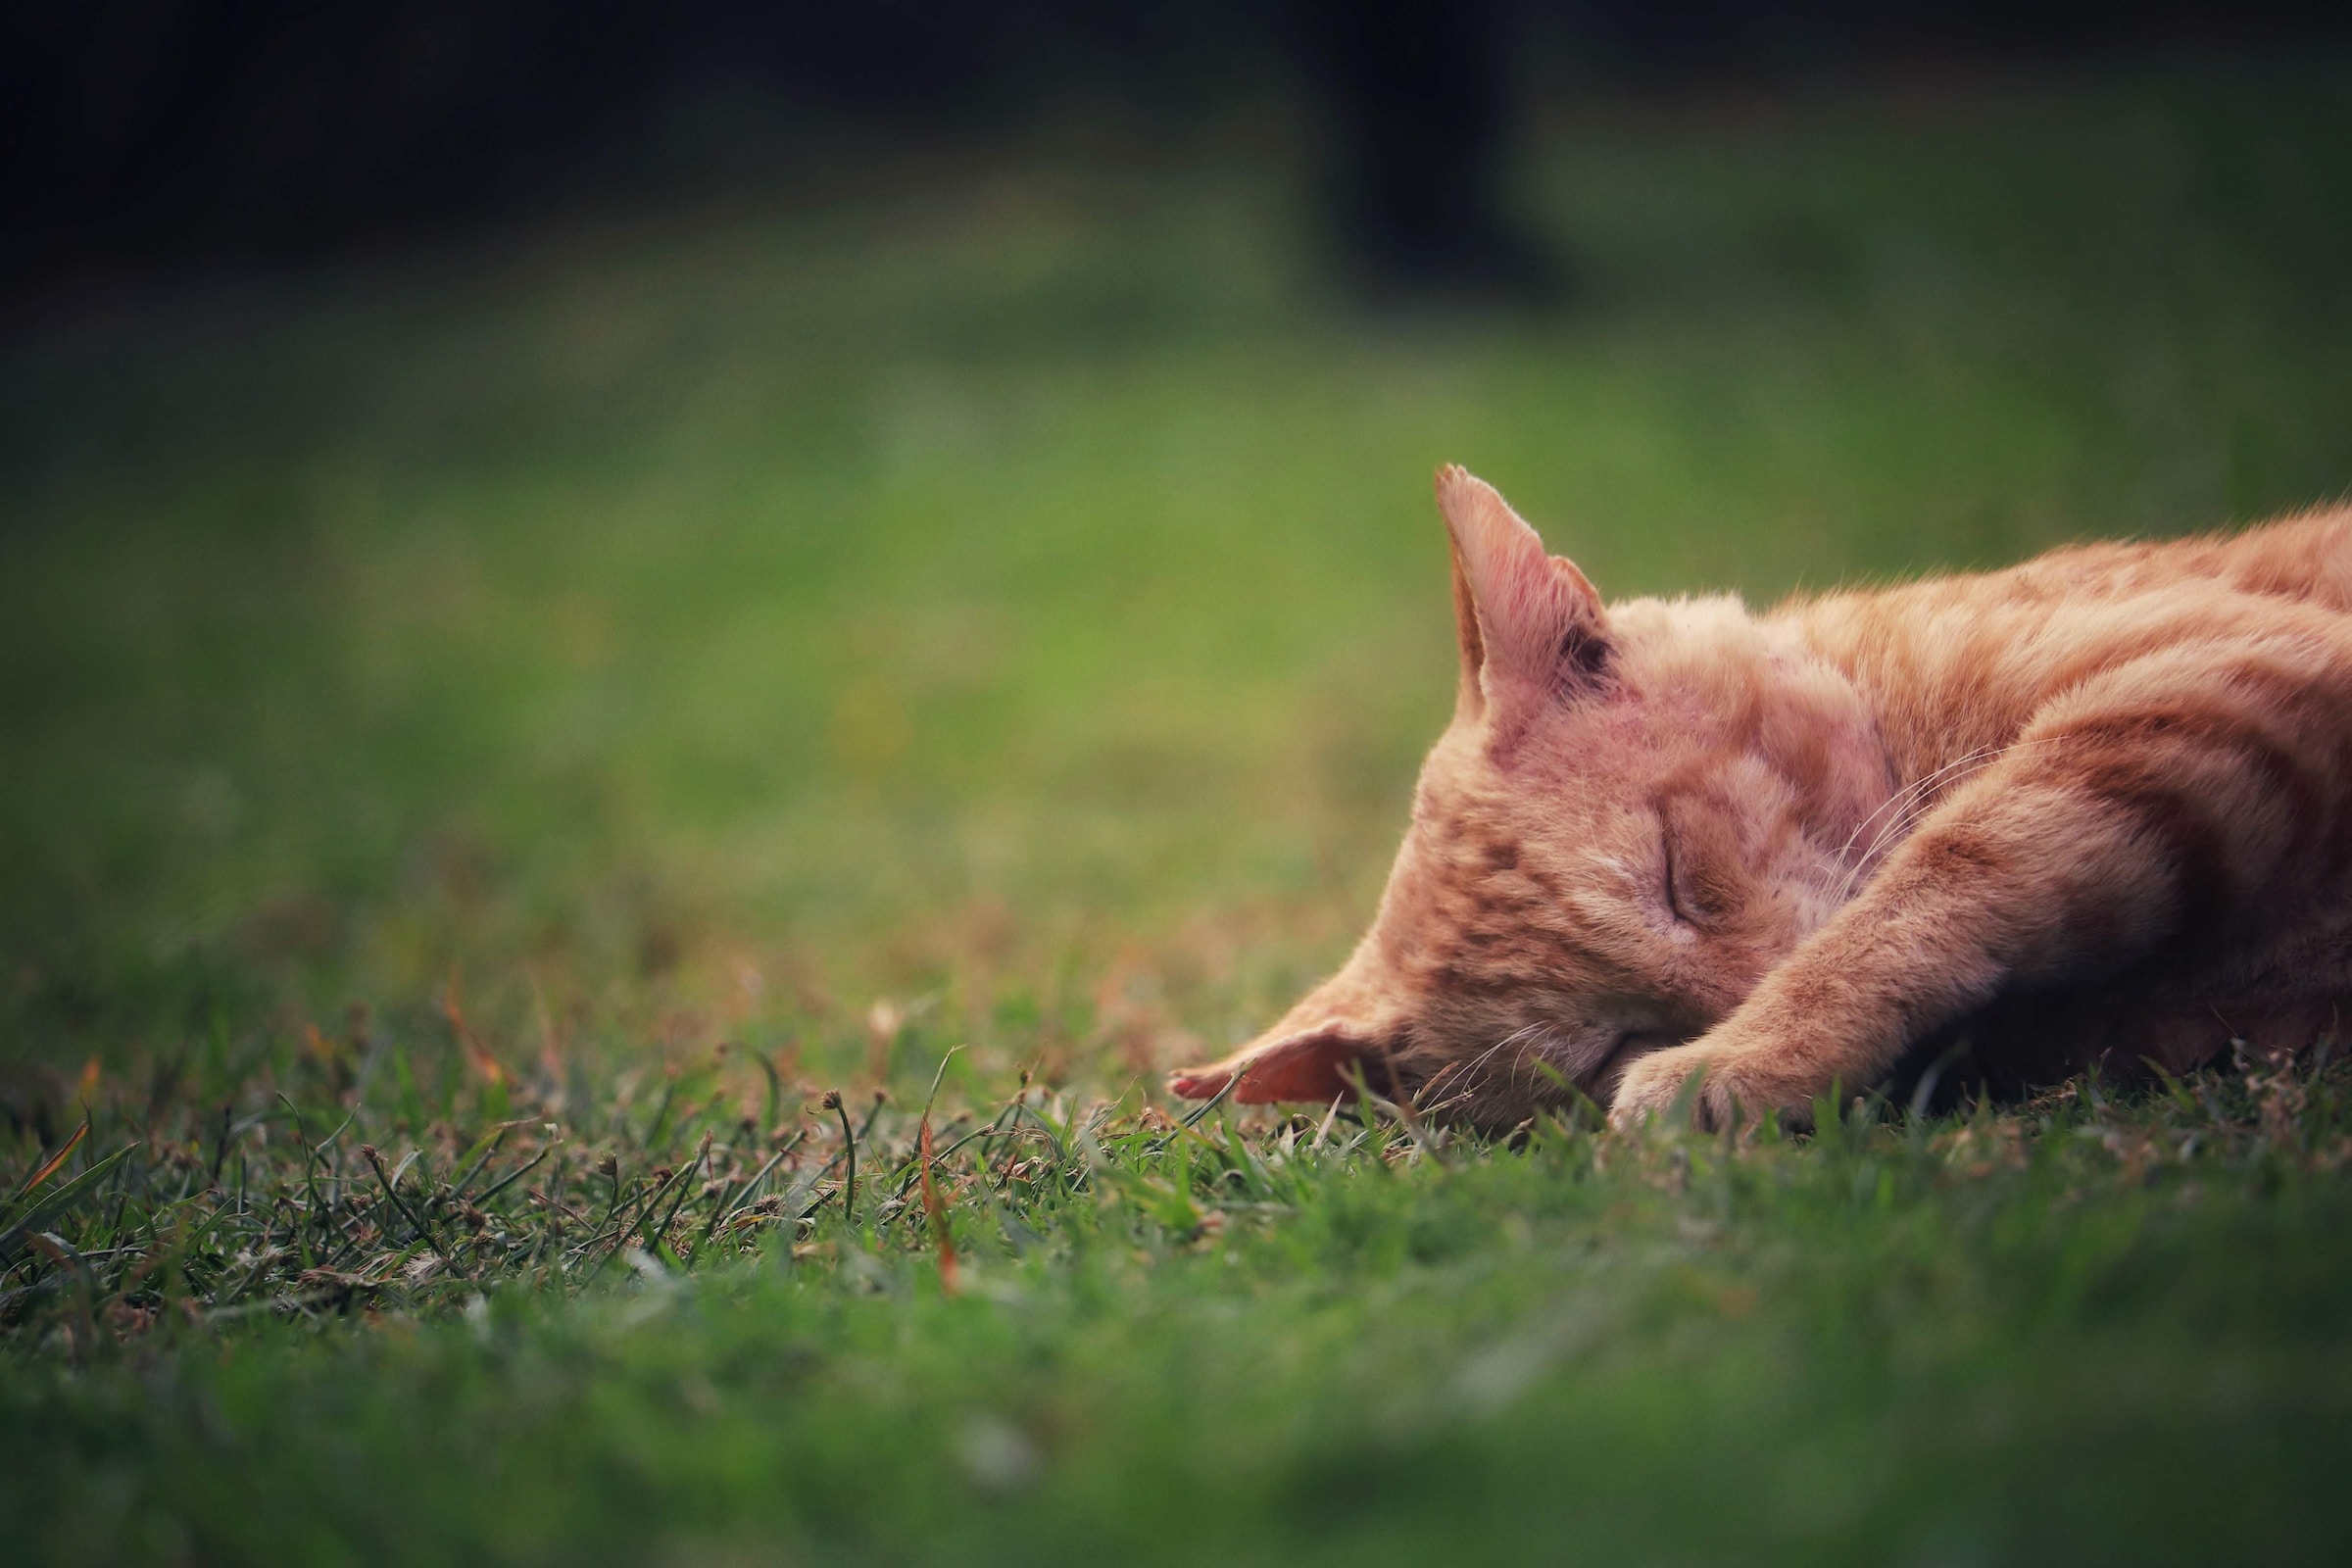 A cat lies down on the grass with her eyes closed | Source: Unsplash